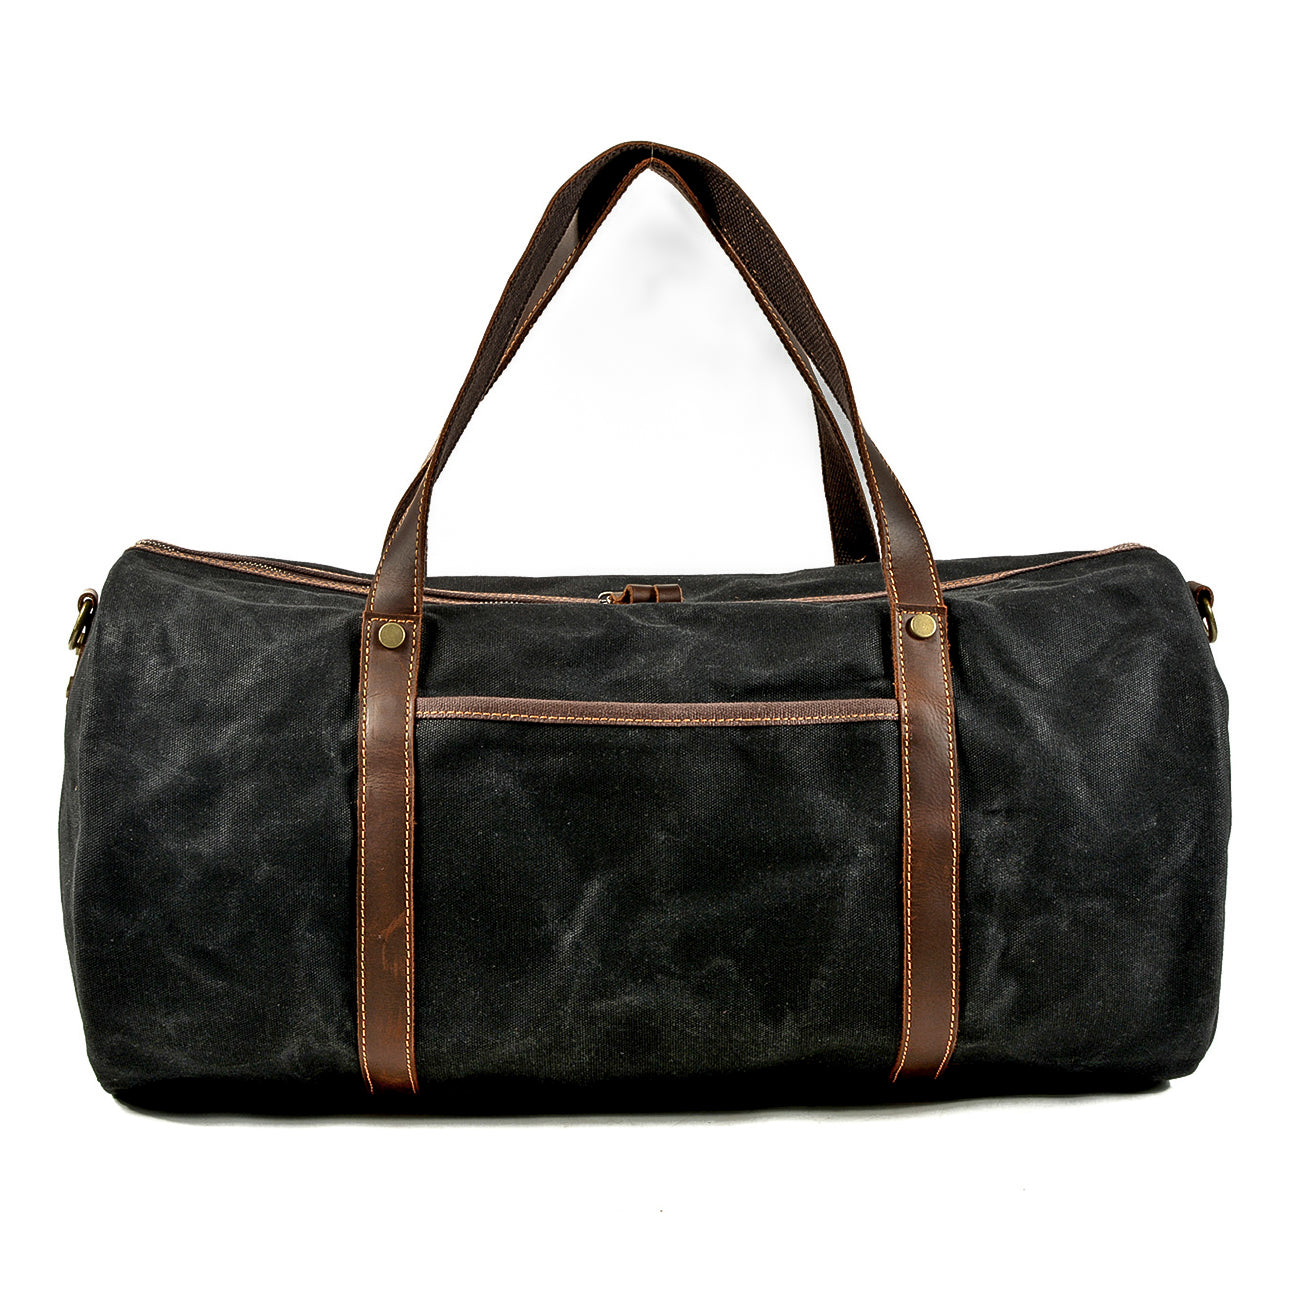 black military carry-all duffle bag